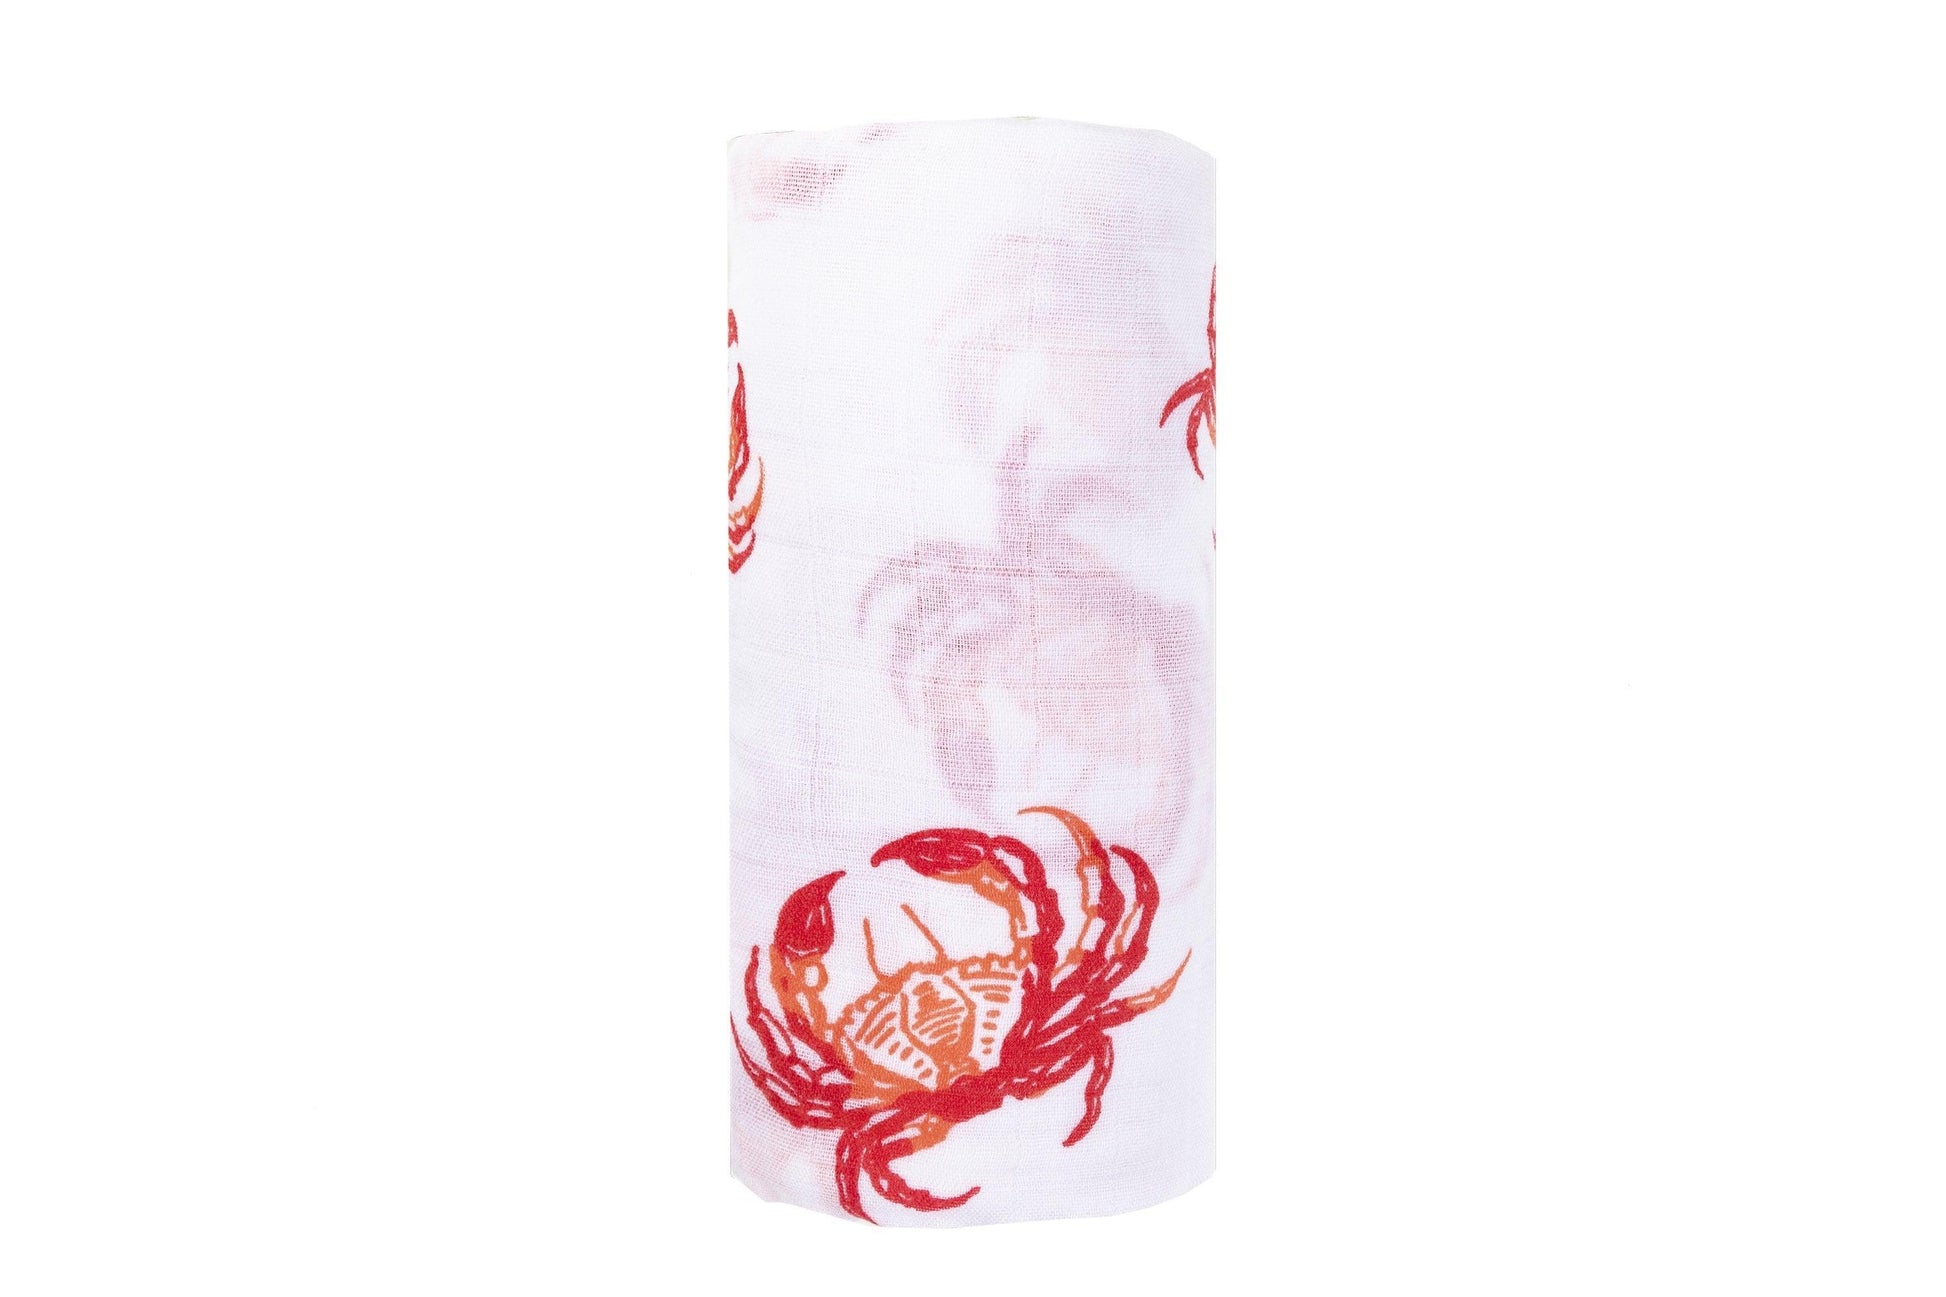 Soft pink muslin swaddle blanket with cute crab illustrations, perfect for newborns and baby showers.